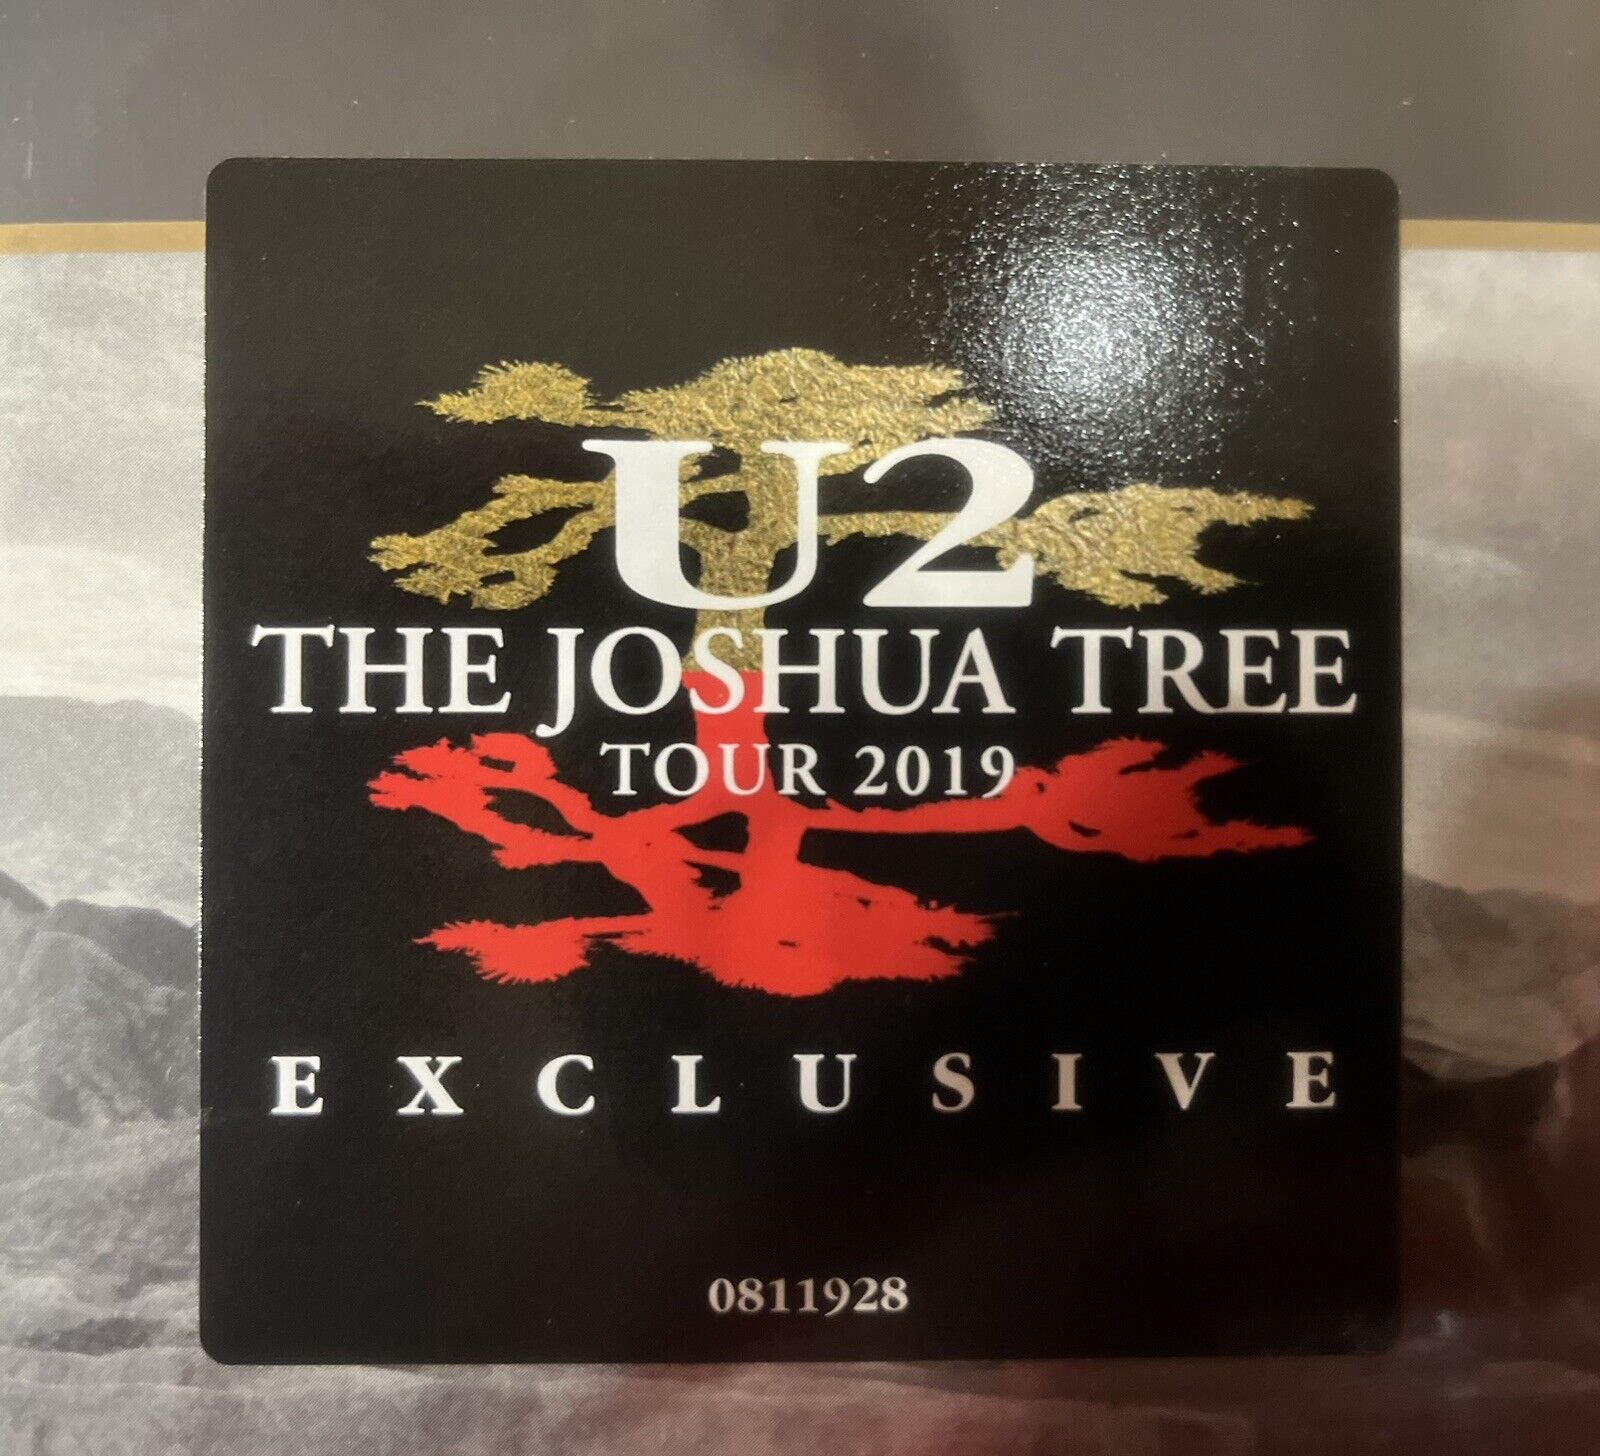 U2 The Joshua Tree Tour 2019 Limited Edition Vinyl LP New In Shrink Wrap Rare